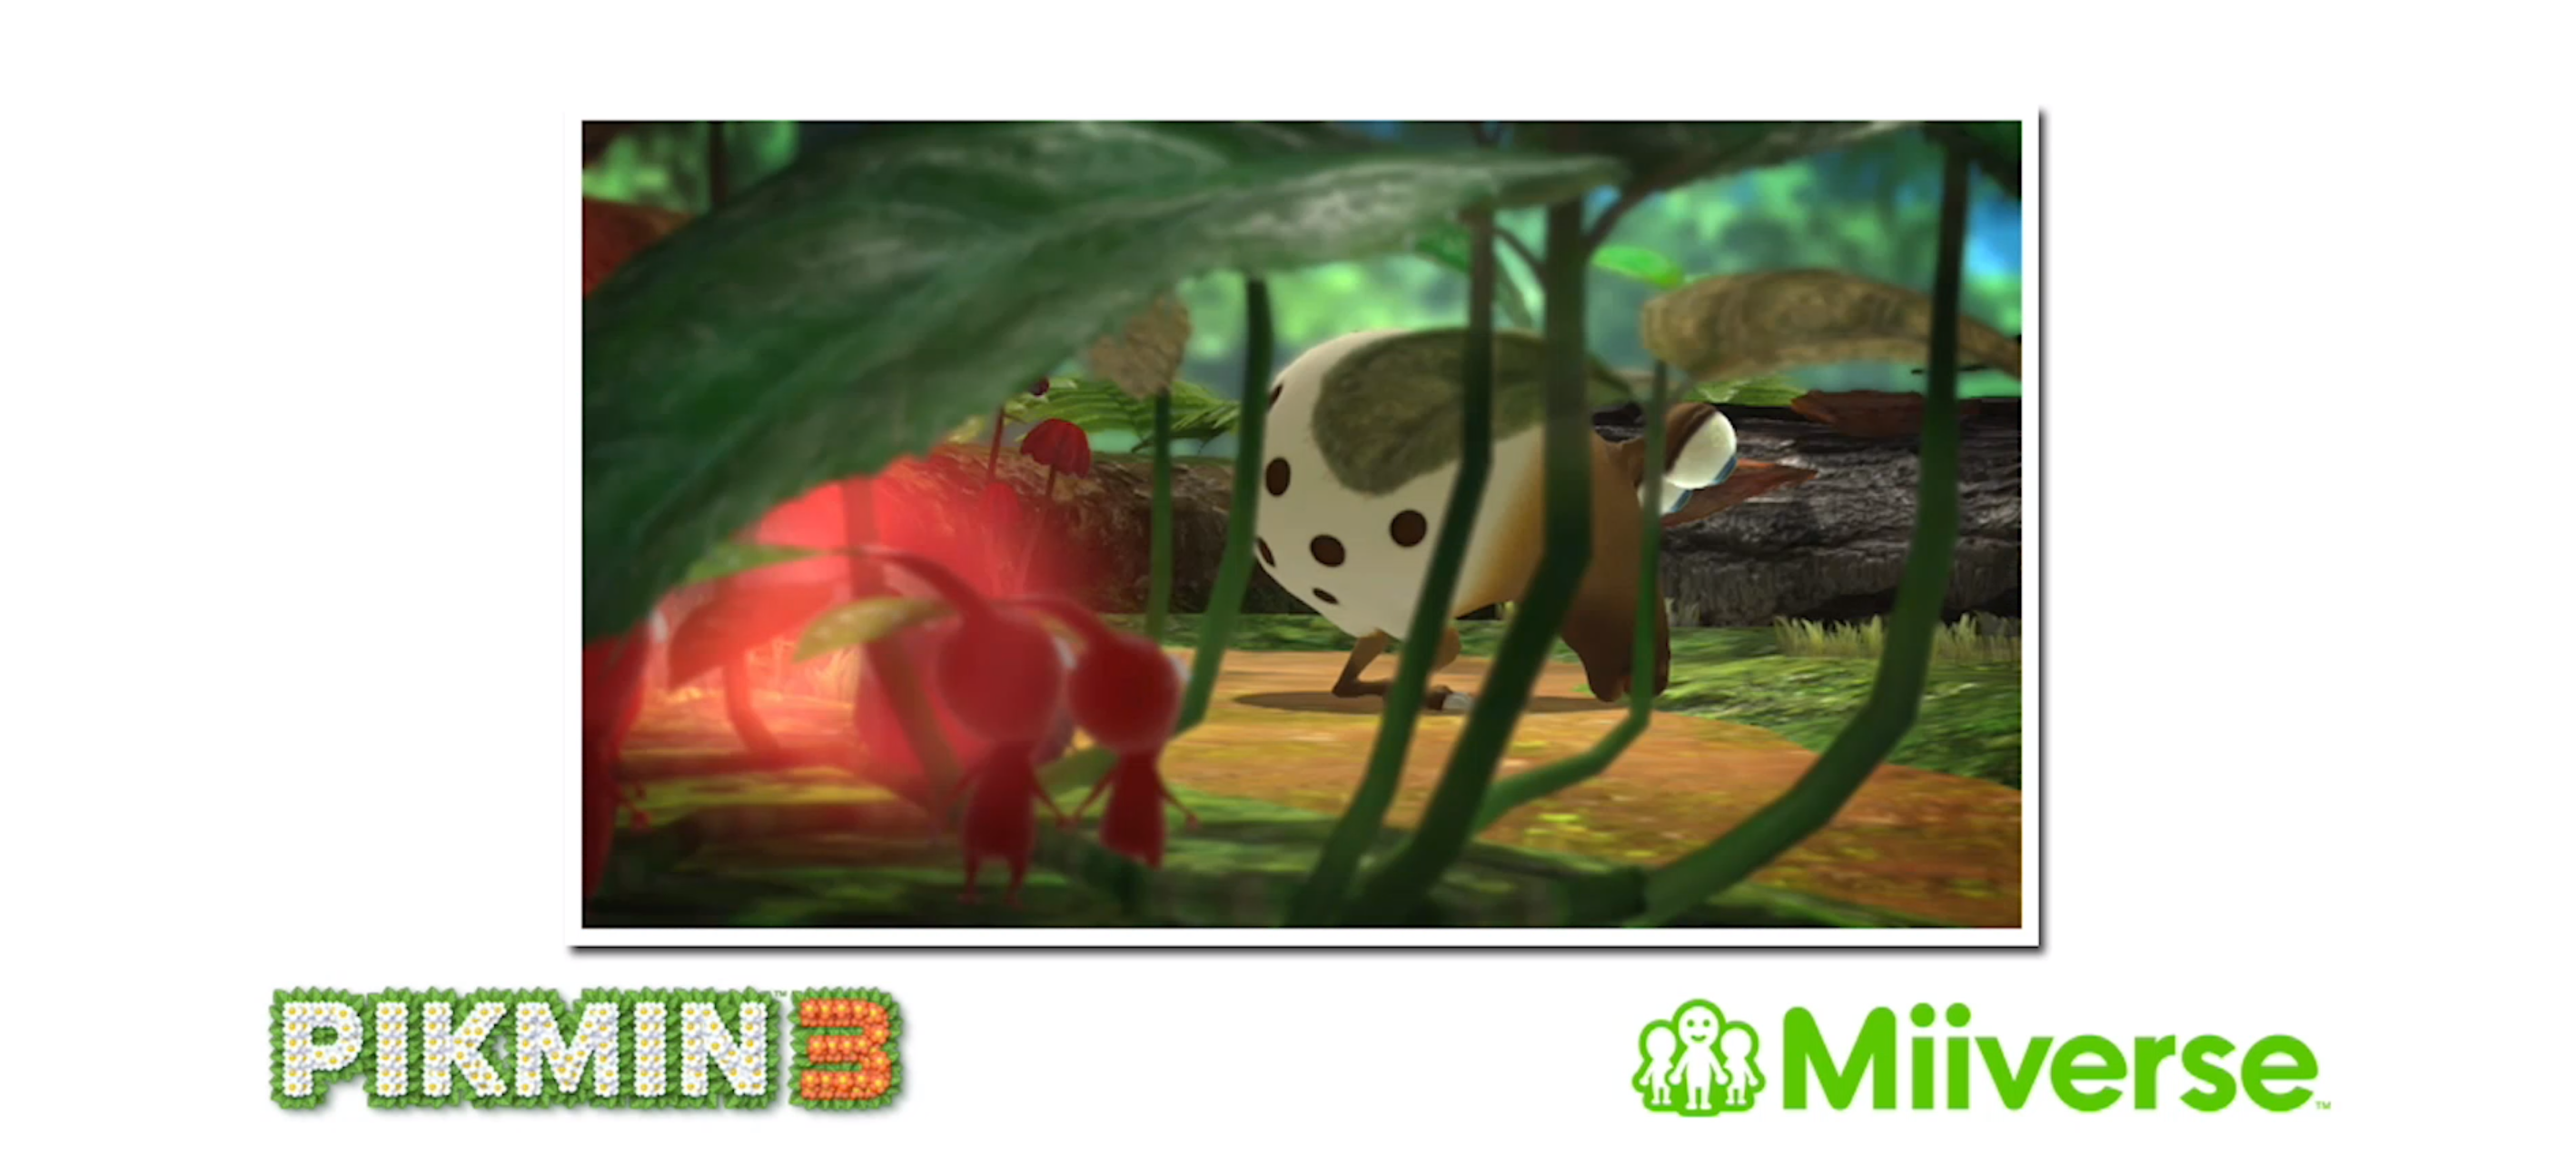 Wii Fit U and Pikmin 3 to feature Miiverse Integration